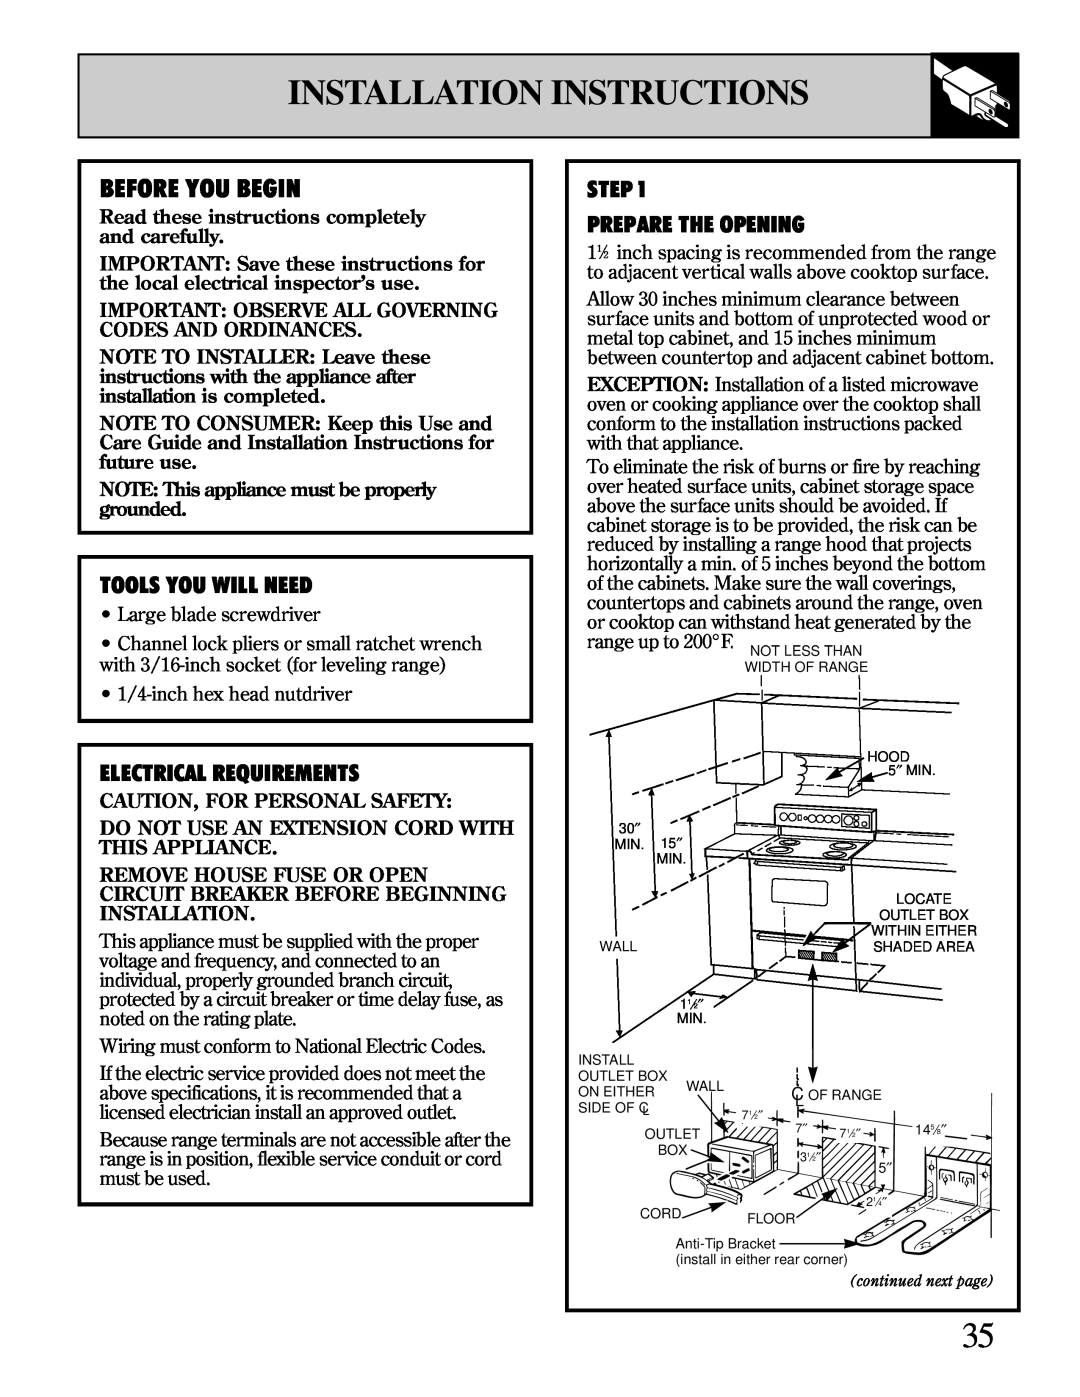 GE 10-95 CG warranty Installation Instructions, Tools You Will Need, Electrical Requirements, Step Prepare The Opening 